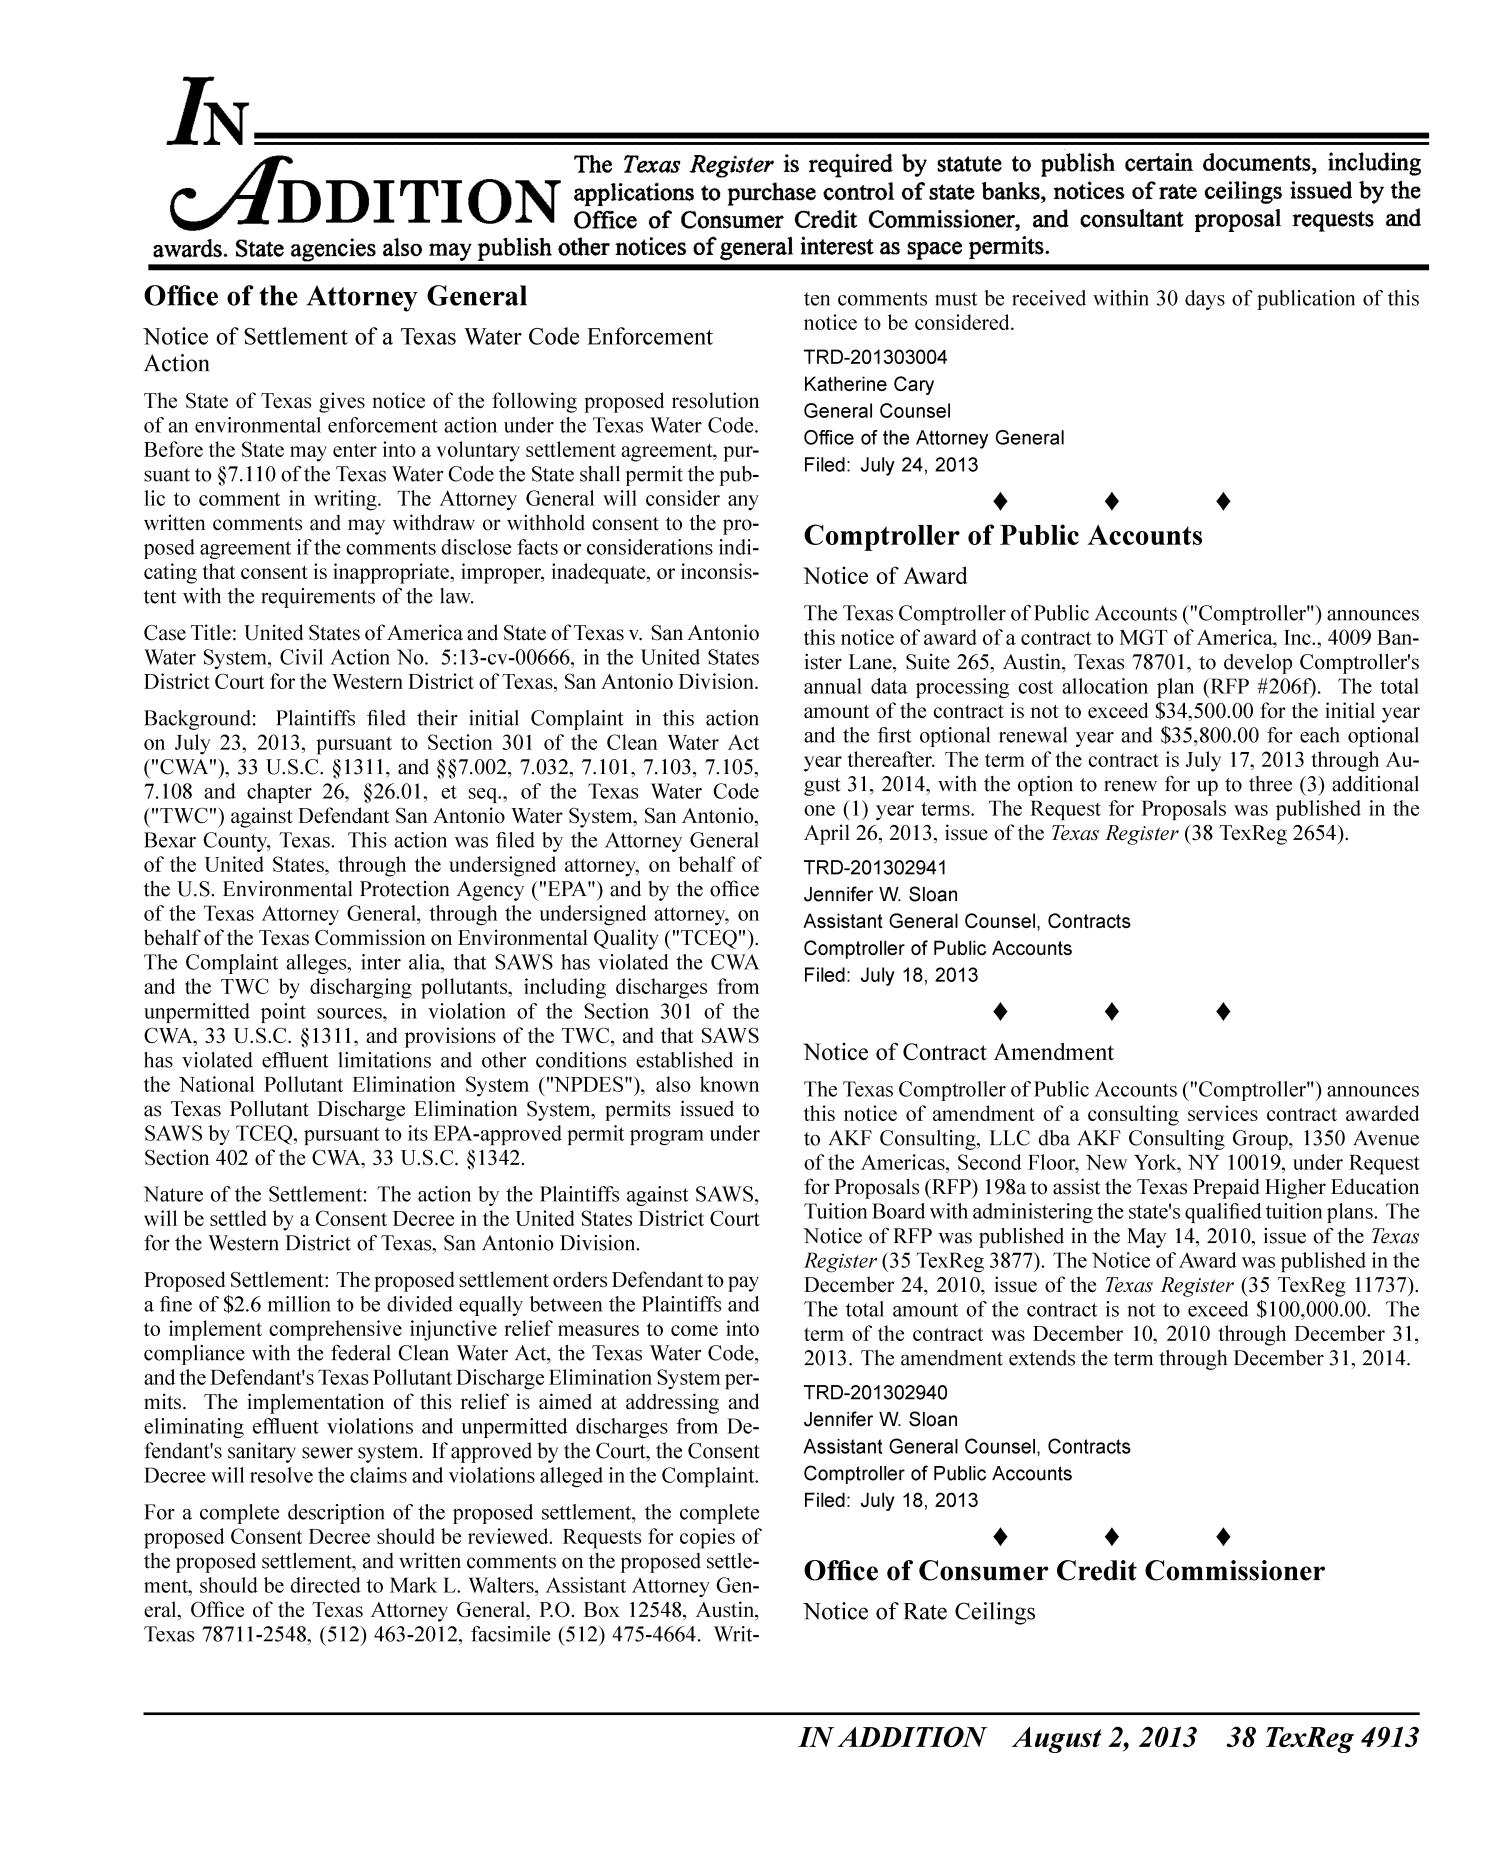 Texas Register, Volume 38, Number 31, Pages 4821-4956, August 2, 2013
                                                
                                                    4913
                                                